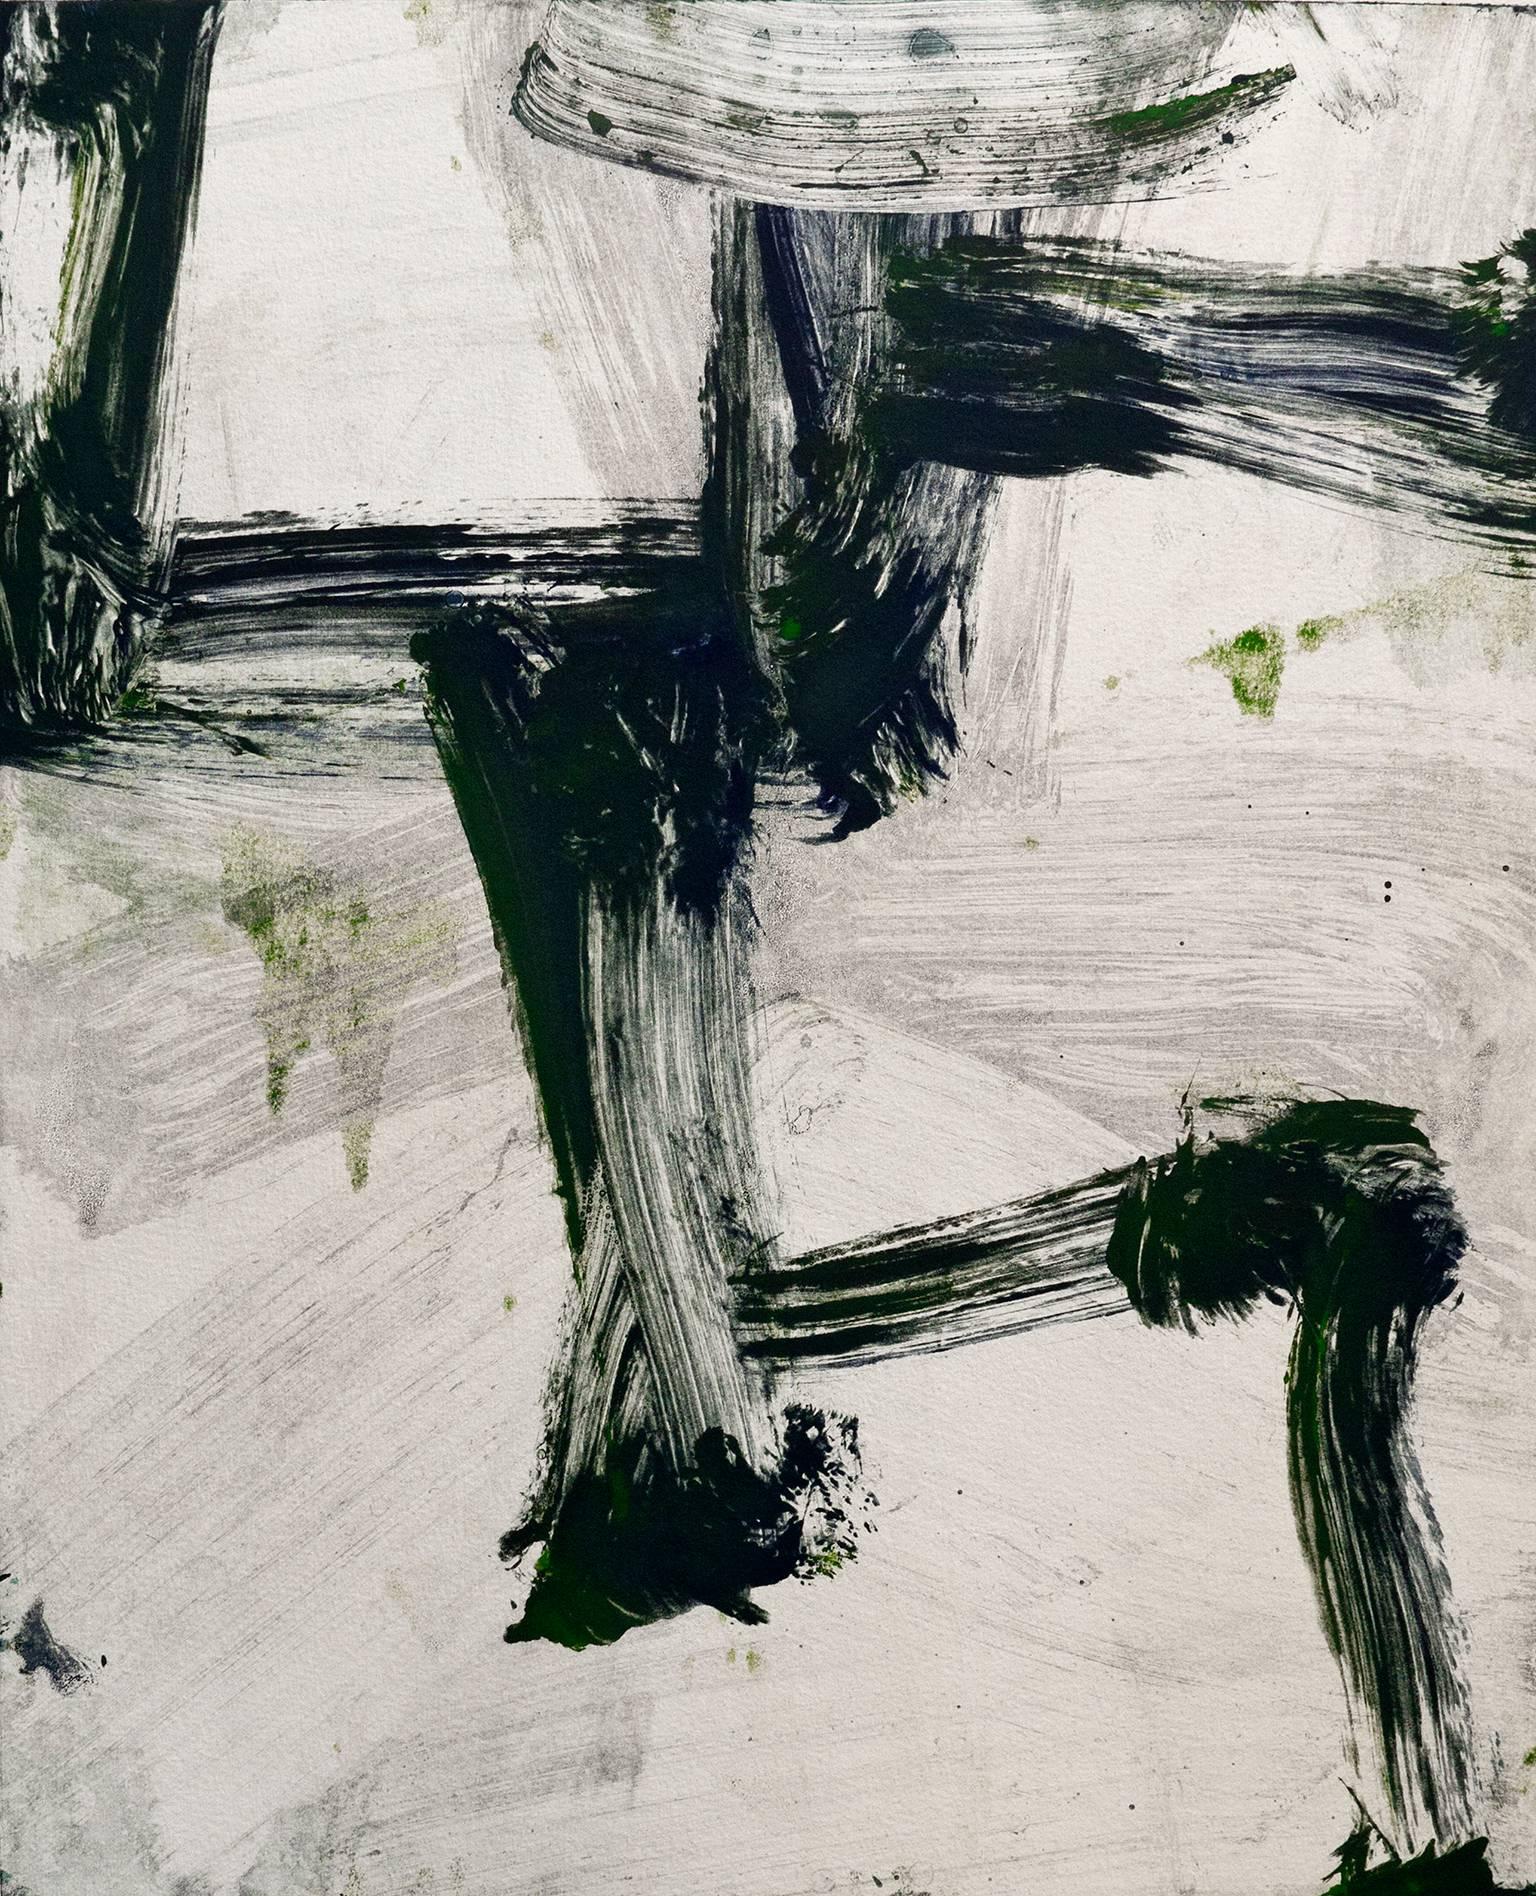 Mark Saltz Abstract Print – "July Series Seven", painterly abstract expressionist print, black, gray, green.